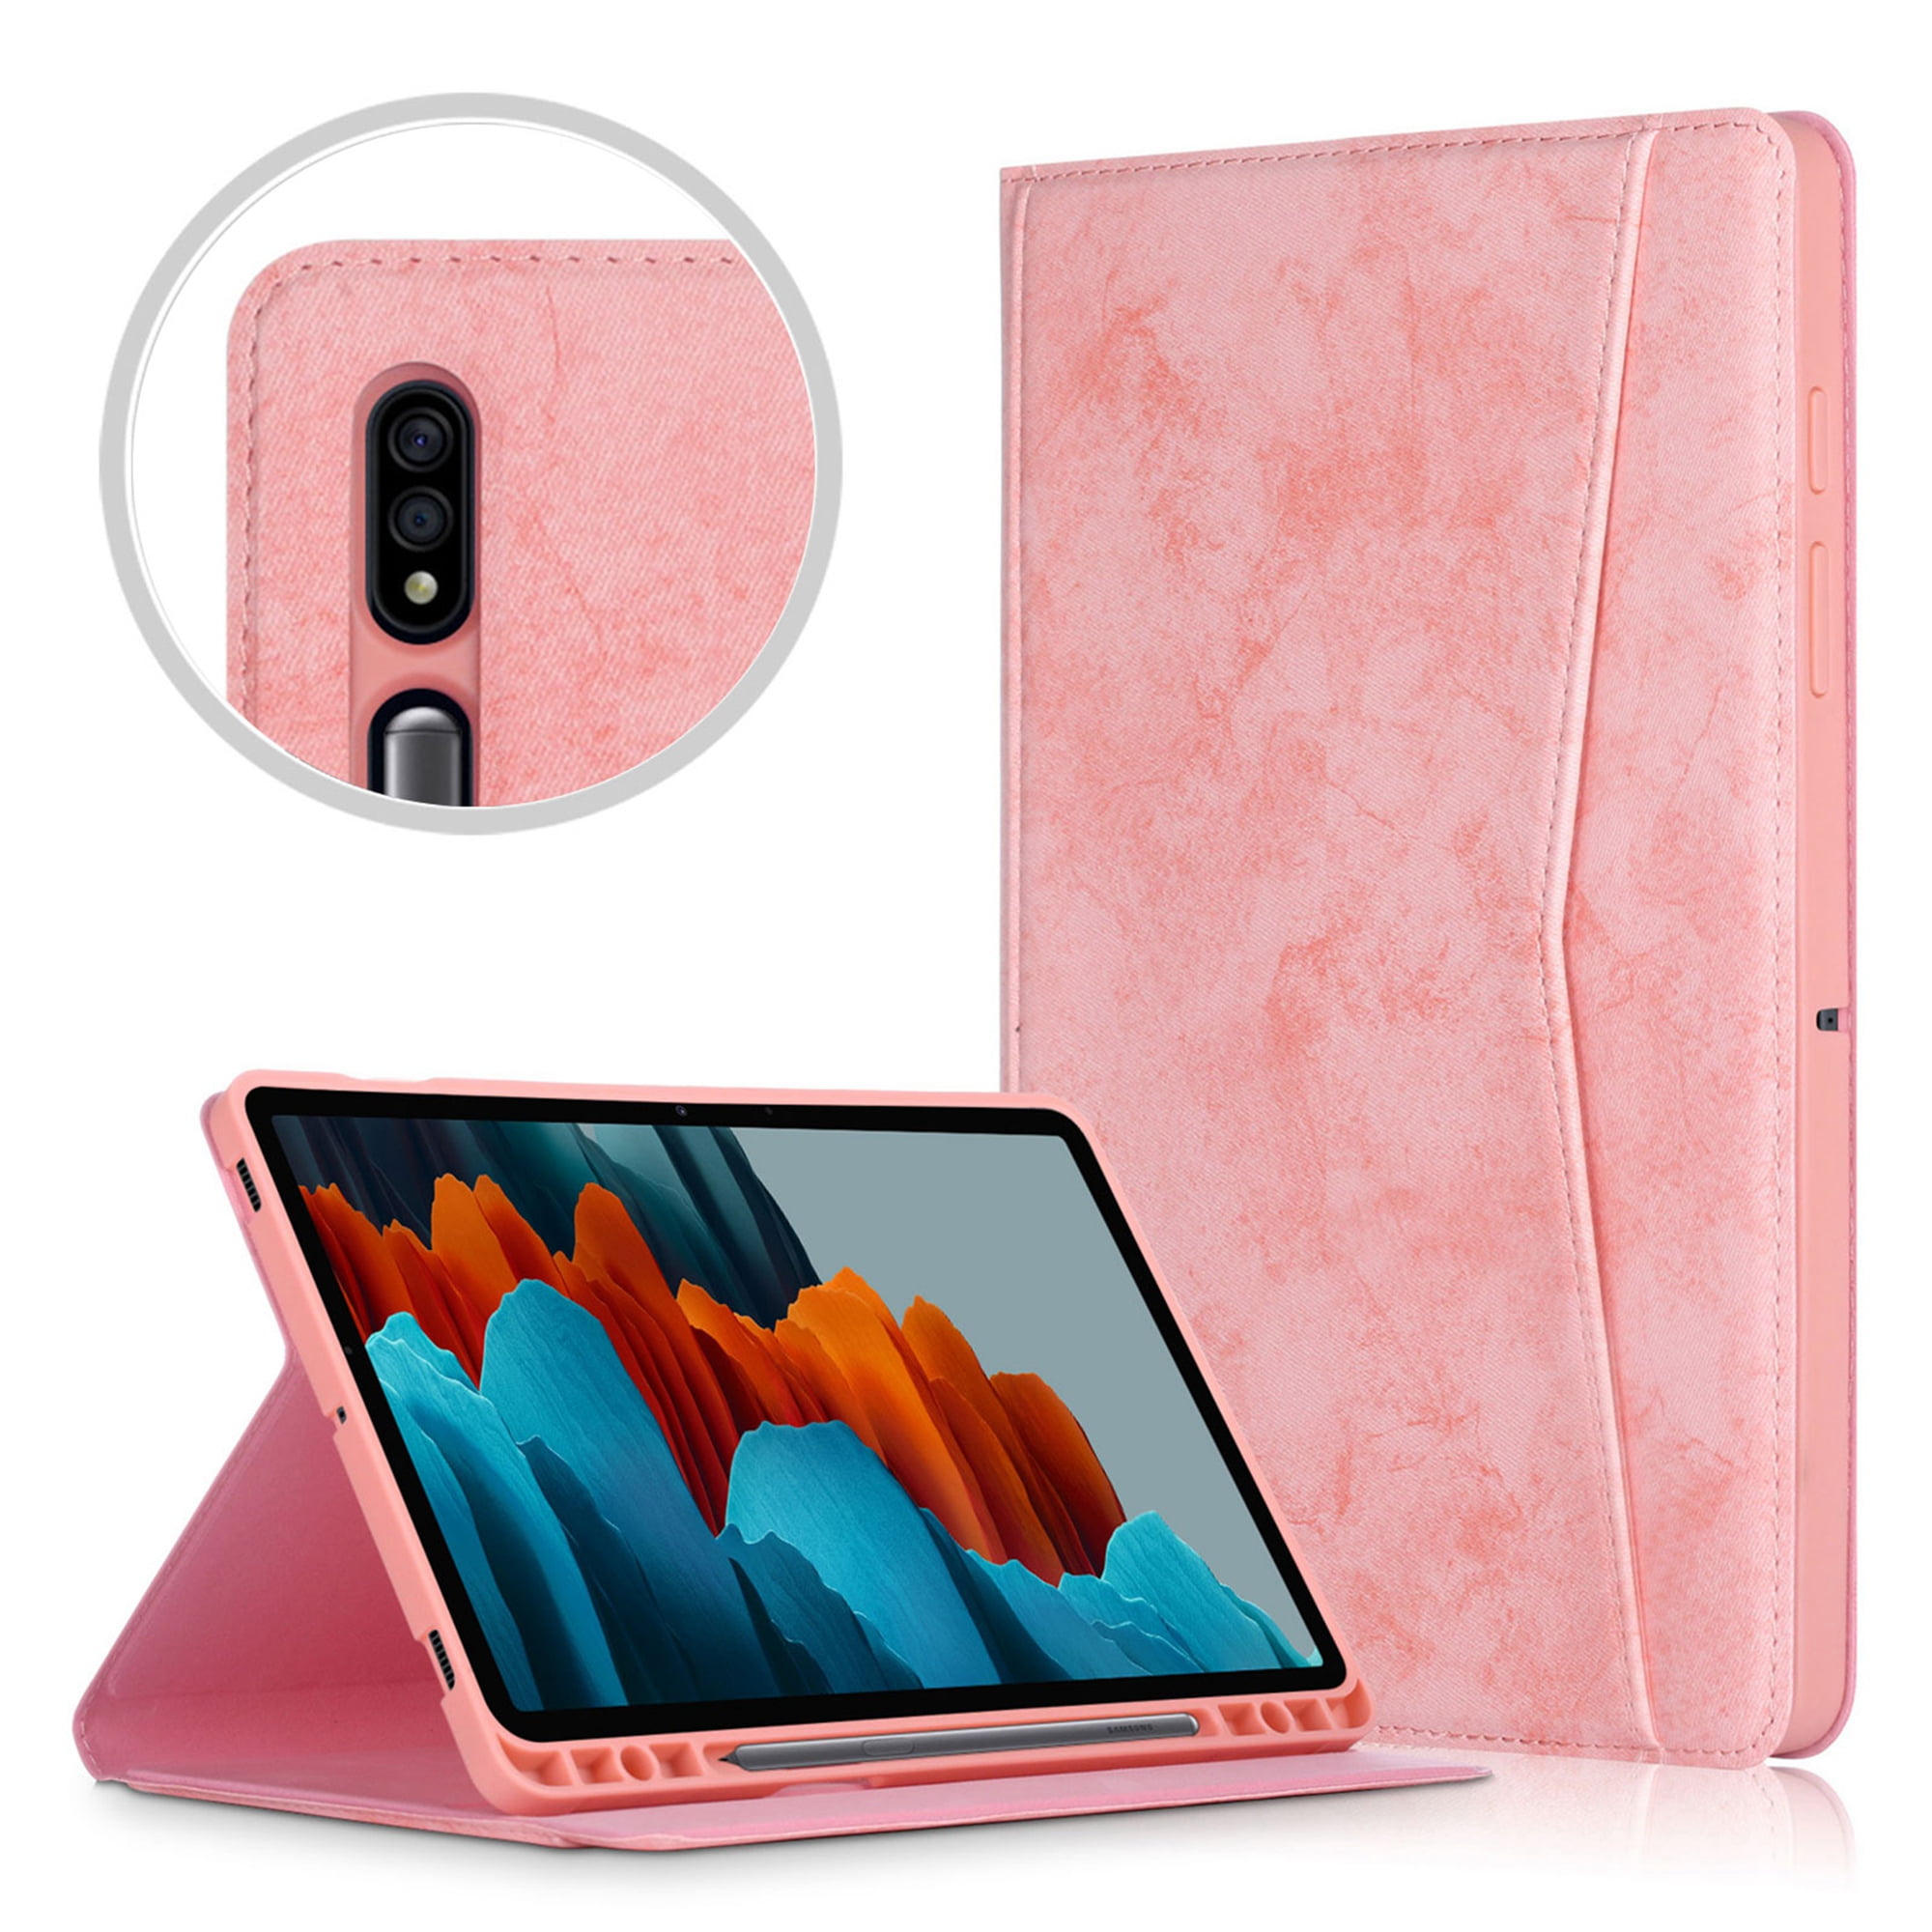 Samsung Galaxy Tab S7 Plus 12.4 inch Case, Dteck Preminm Leather MultiAngle Viewing Folio Smart